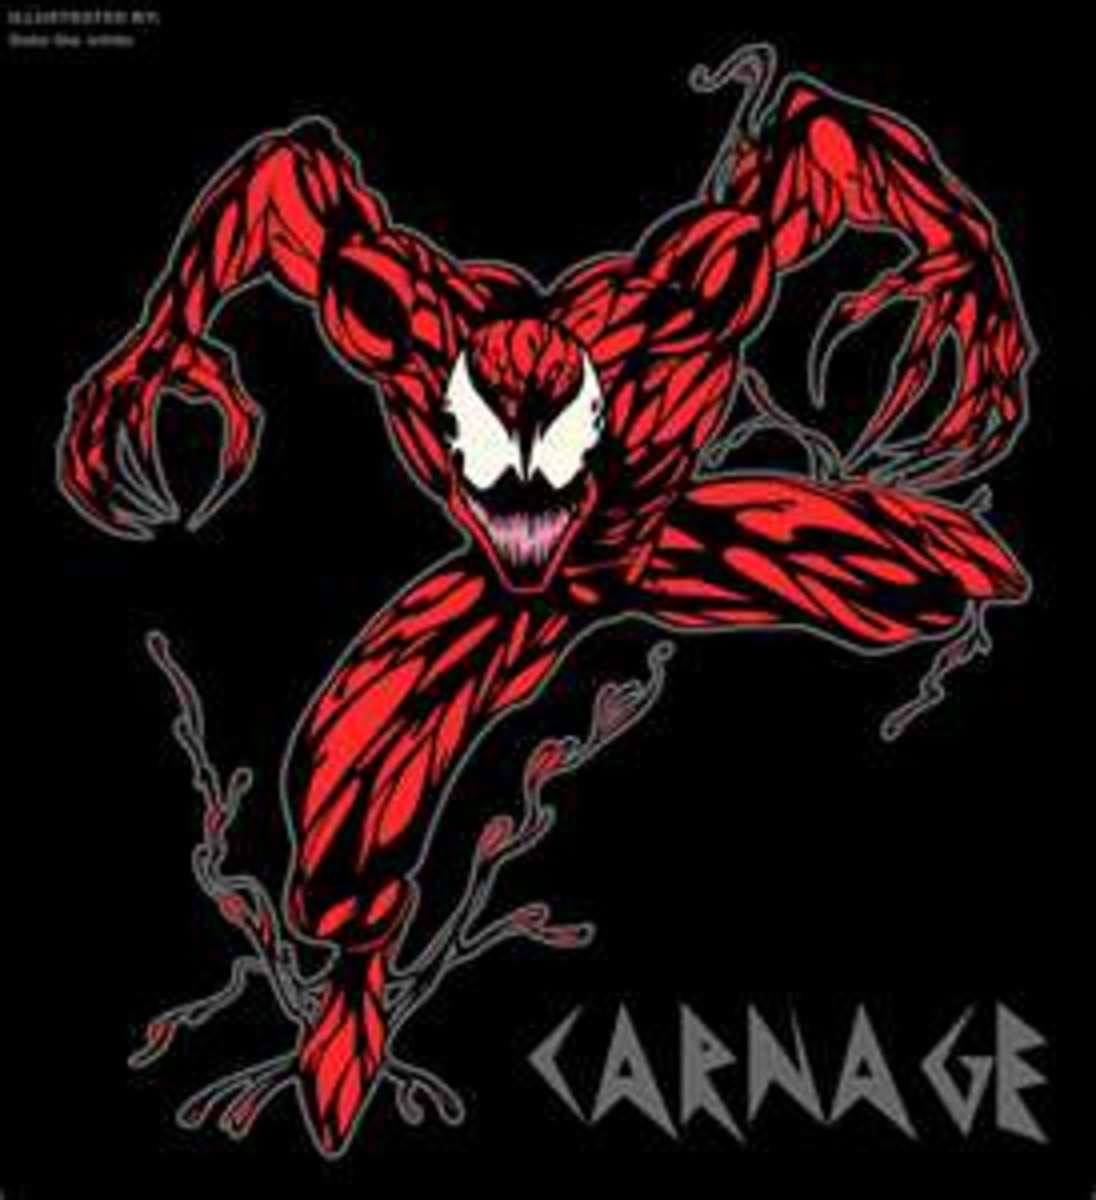 Being the offspring of Venom has it's perks. Just ask Carnage.